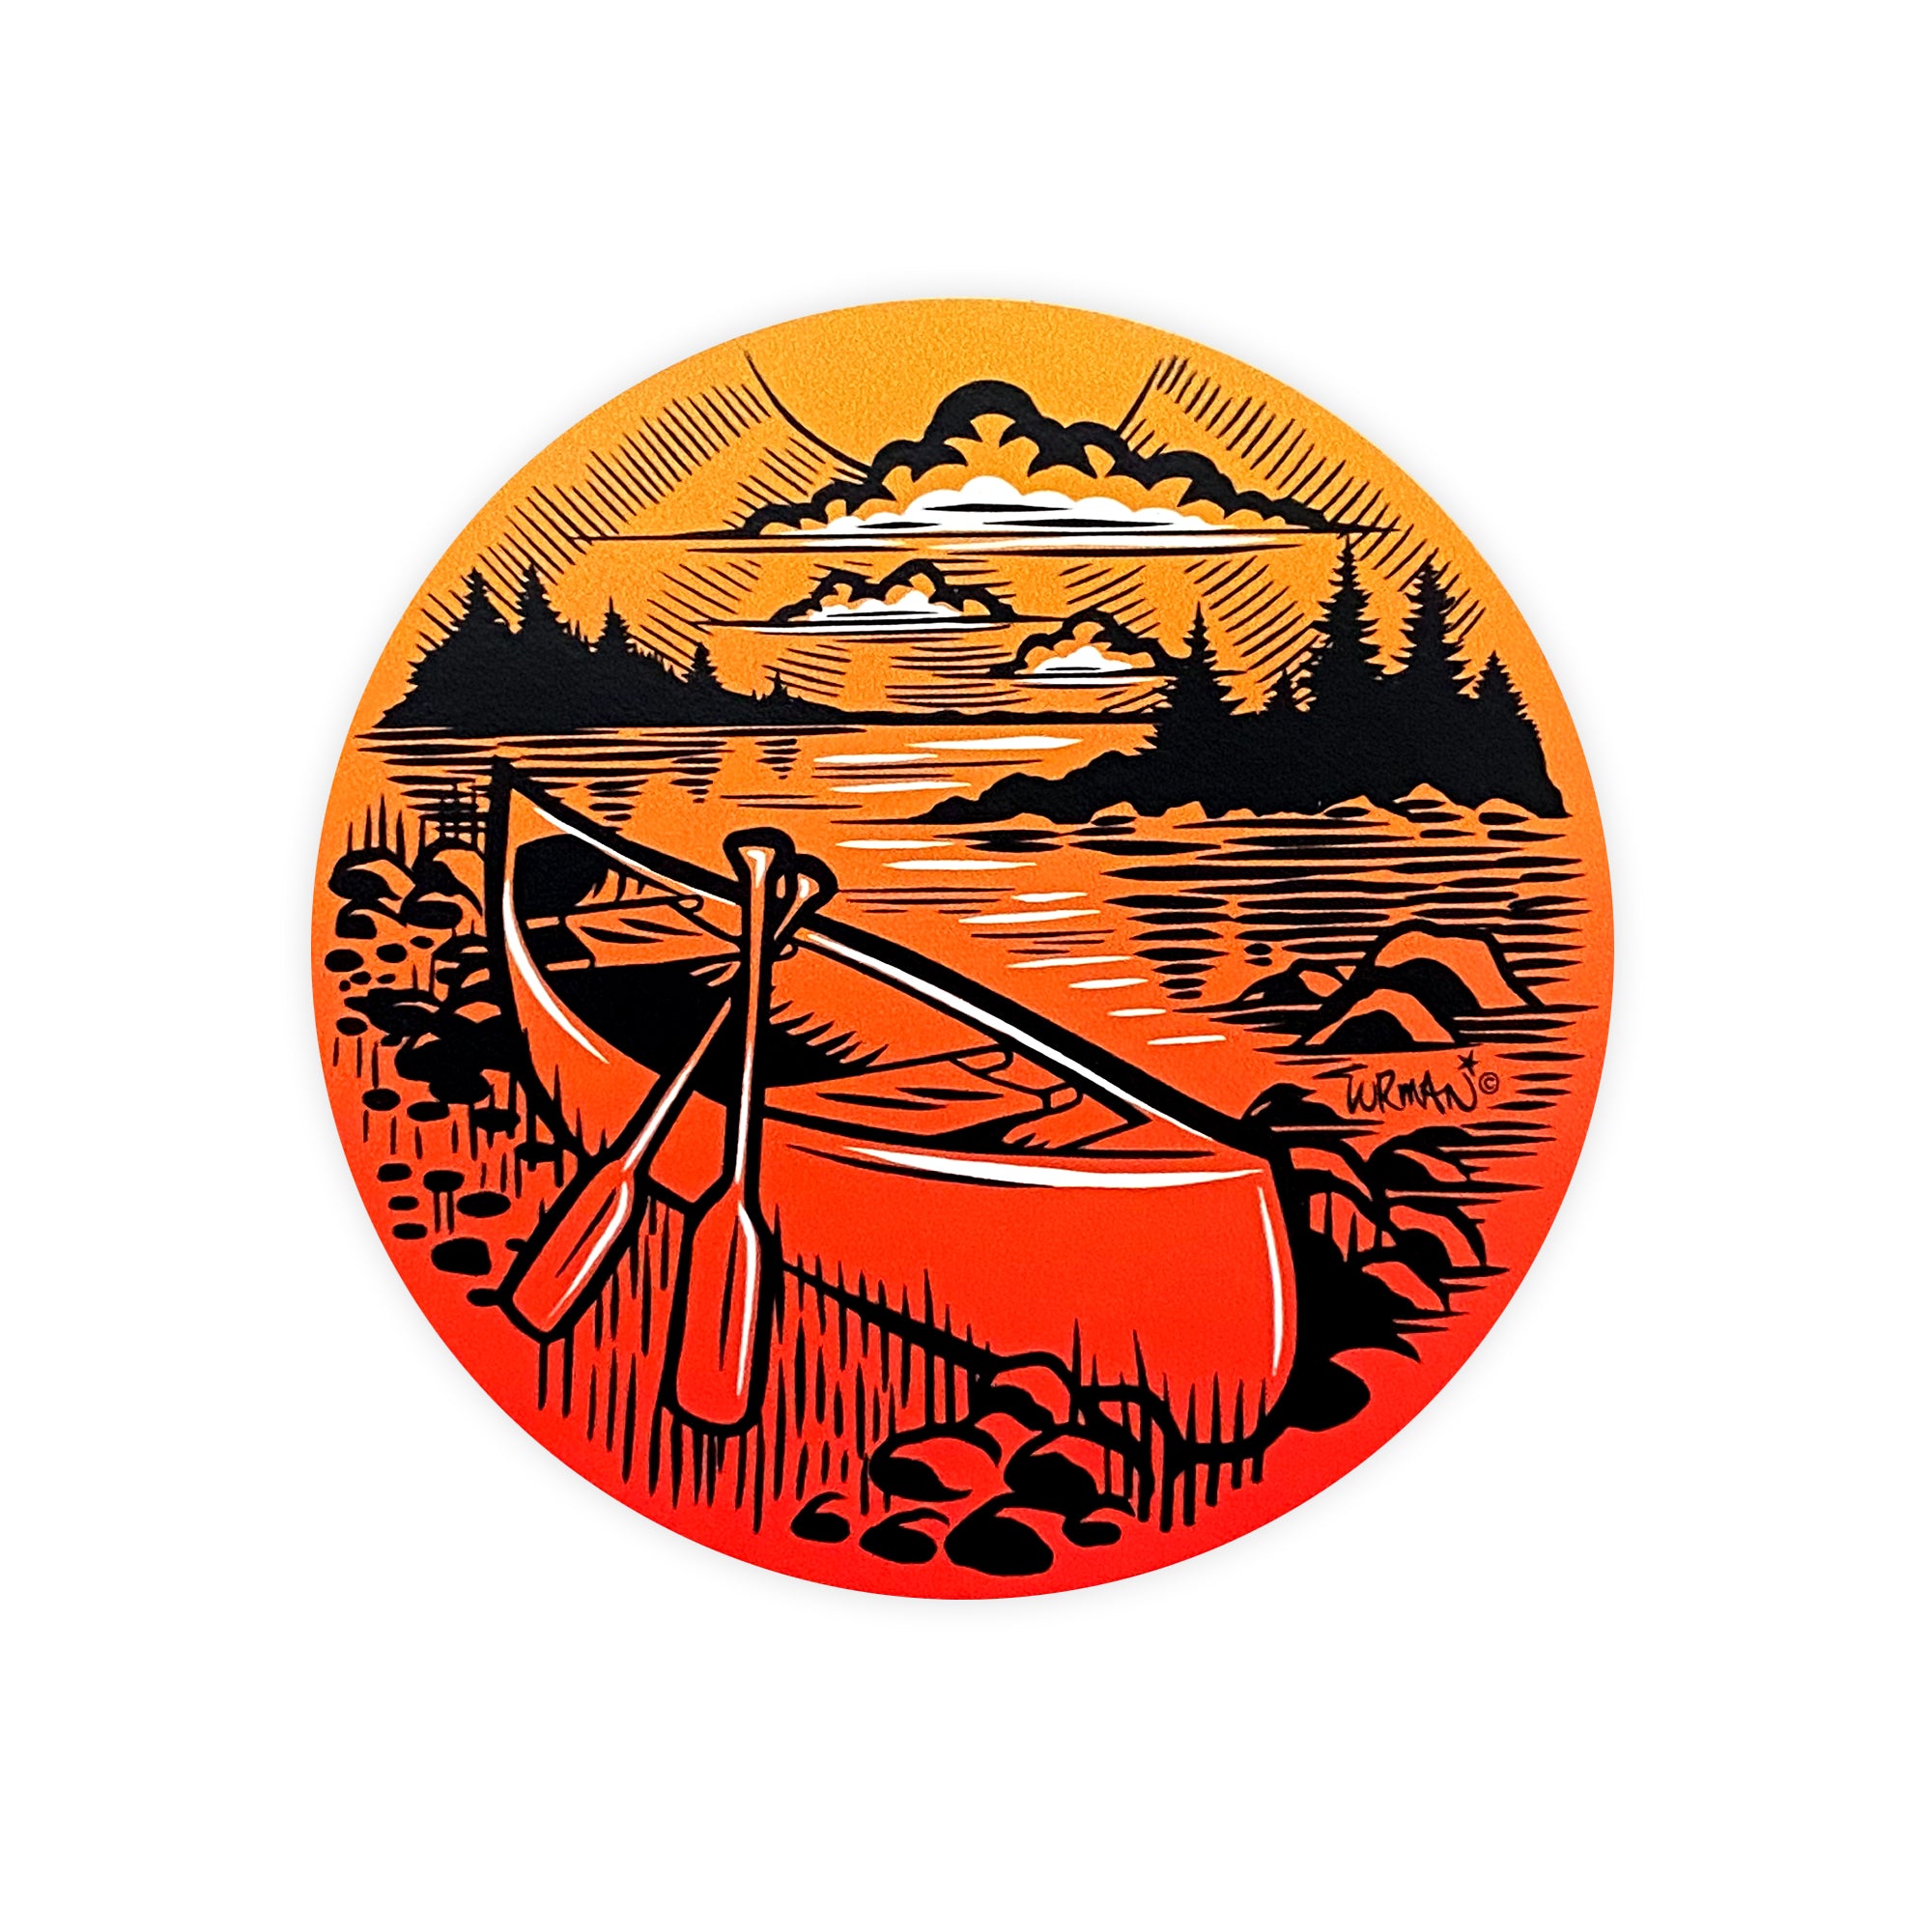 Kayaking Stickers by Recollections™